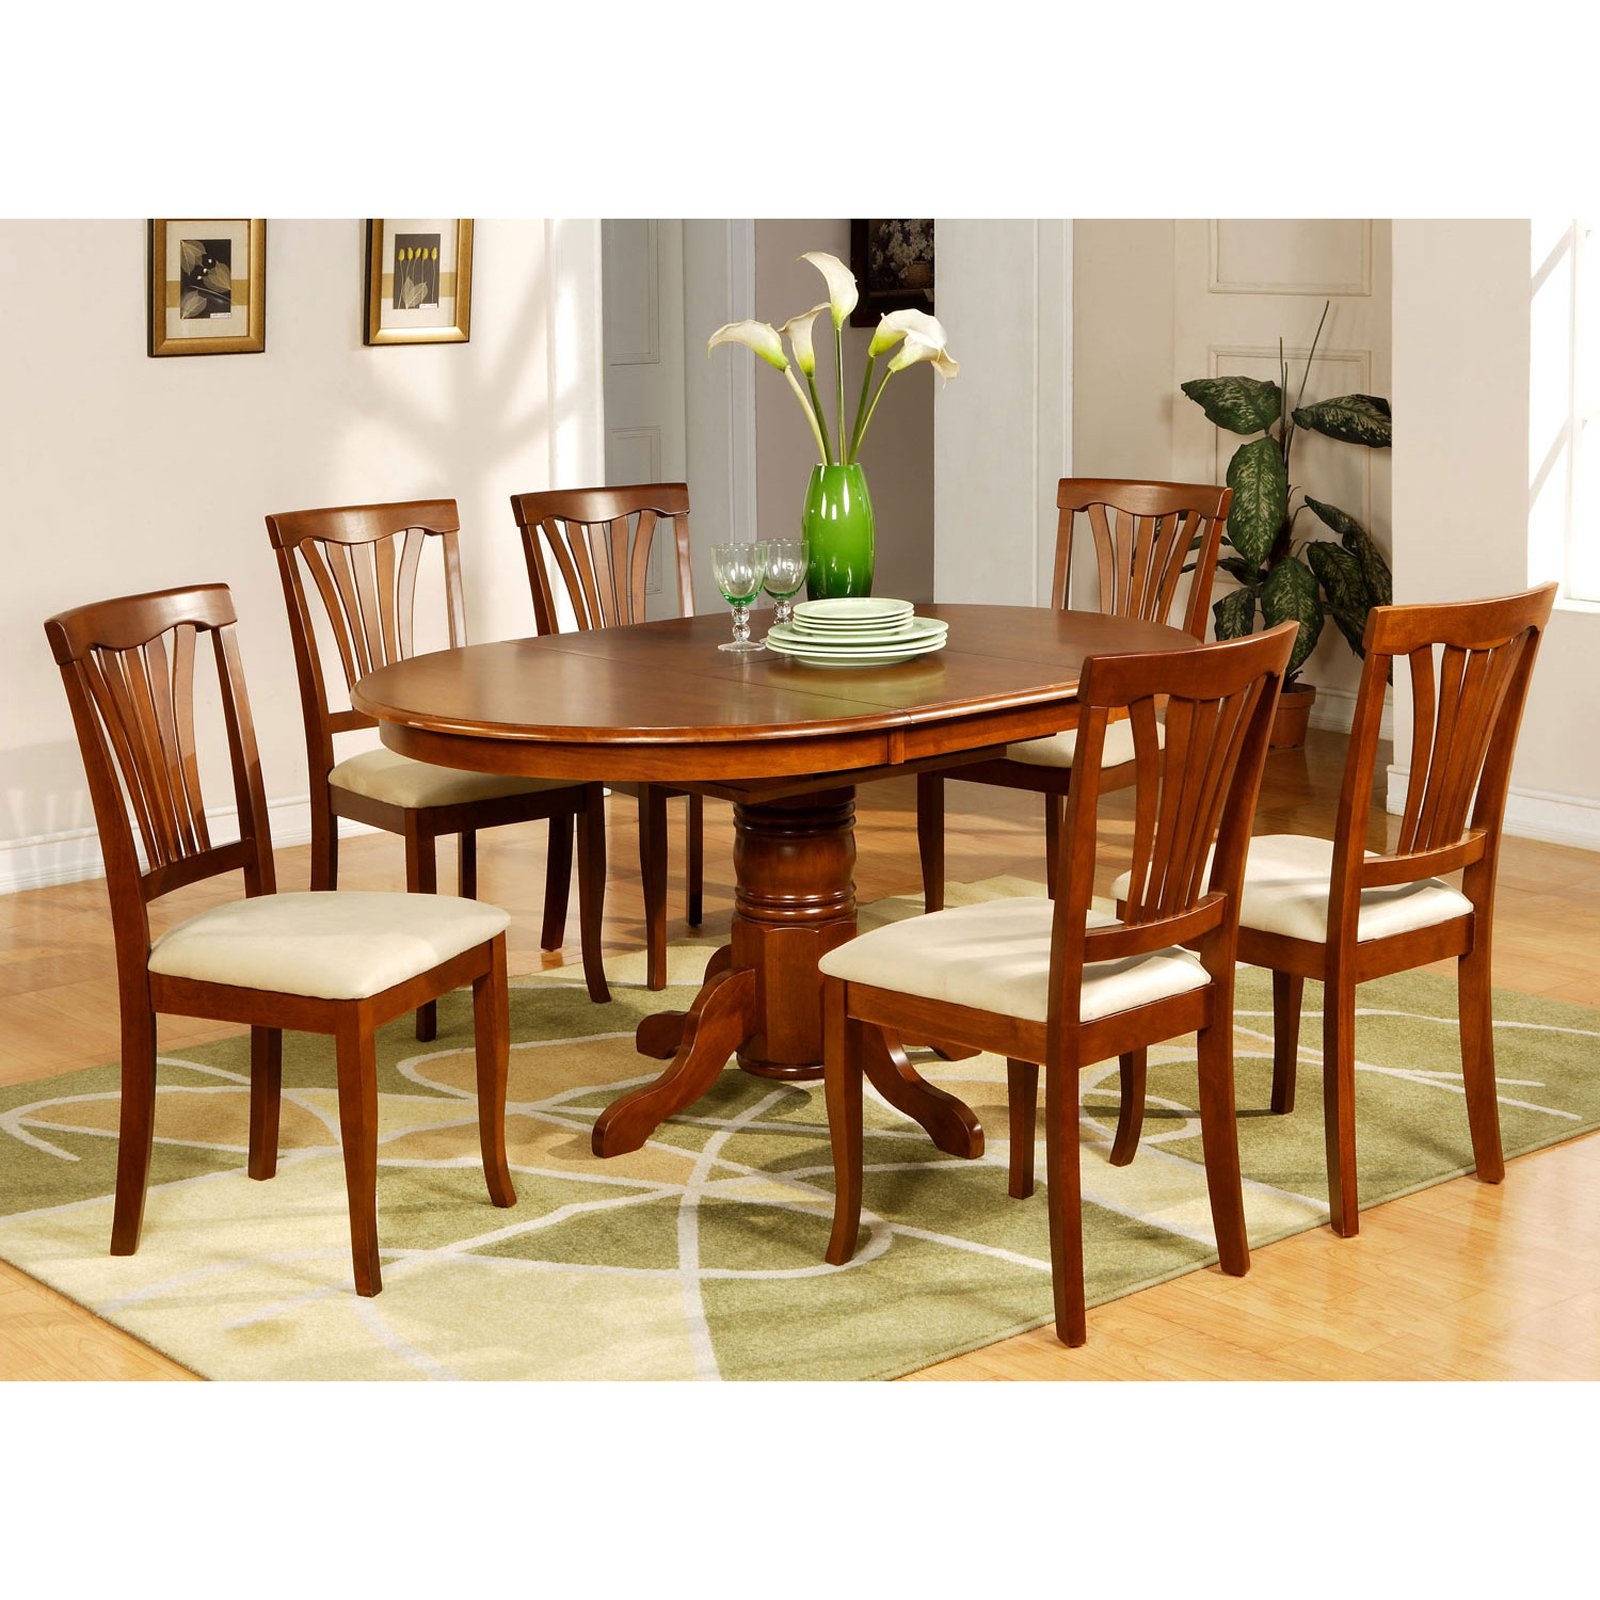 Oval Dining Table Set For 6 - Ideas on Foter